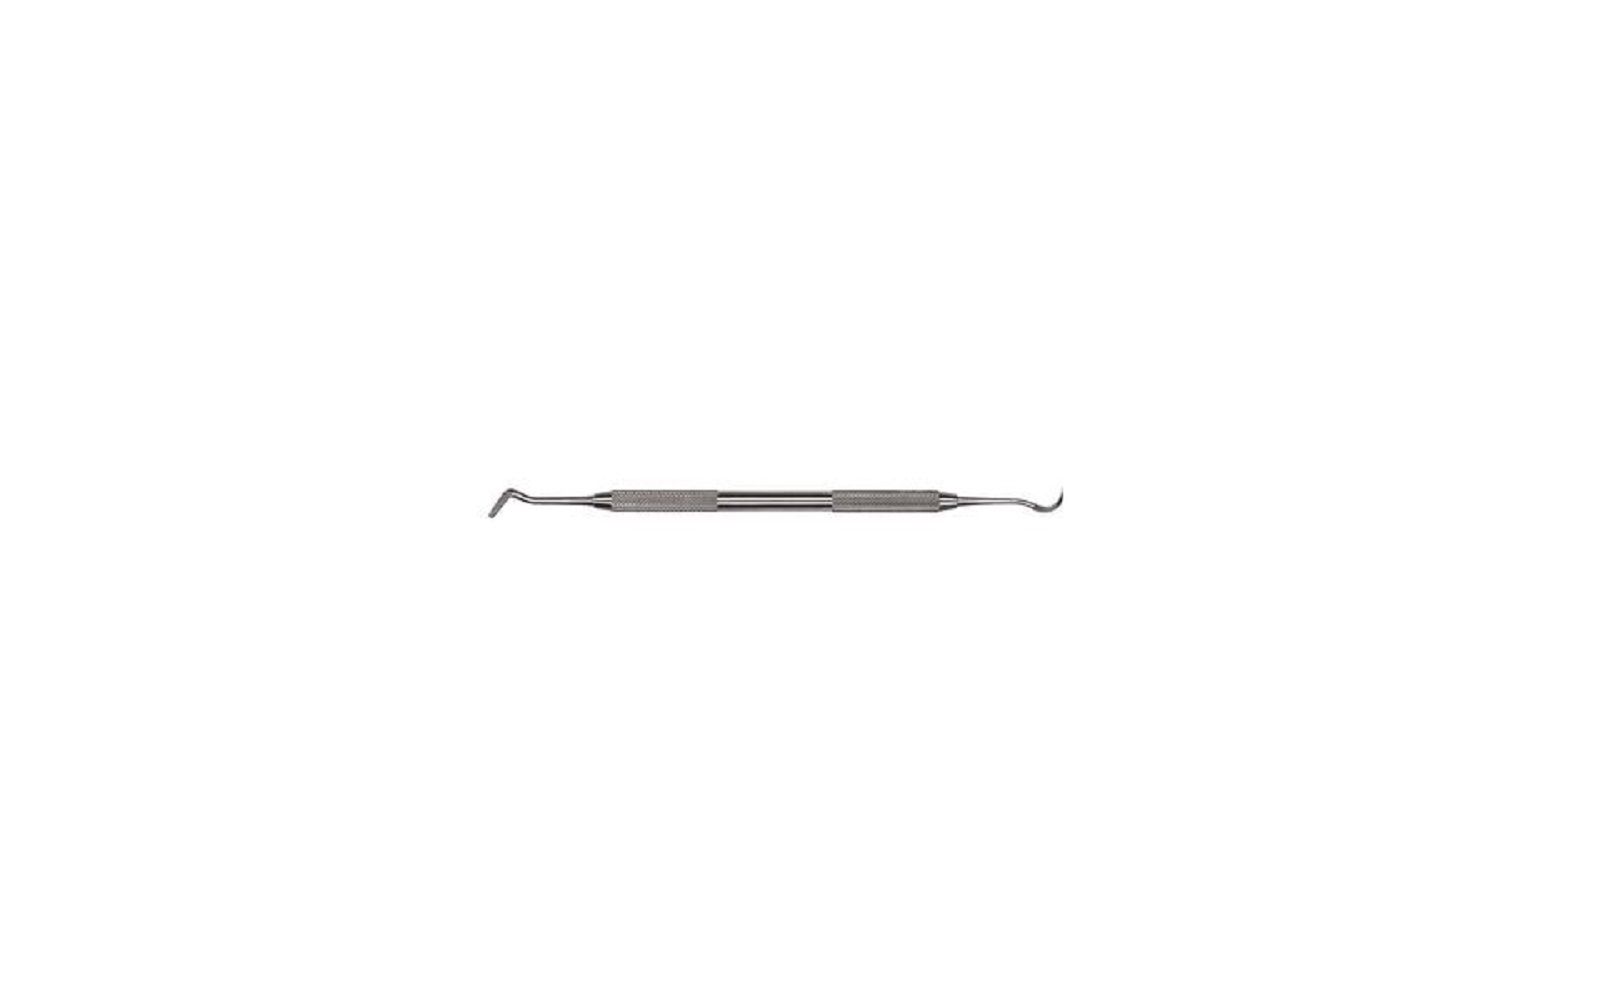 Orthodontic 1 band pusher scaler, double end